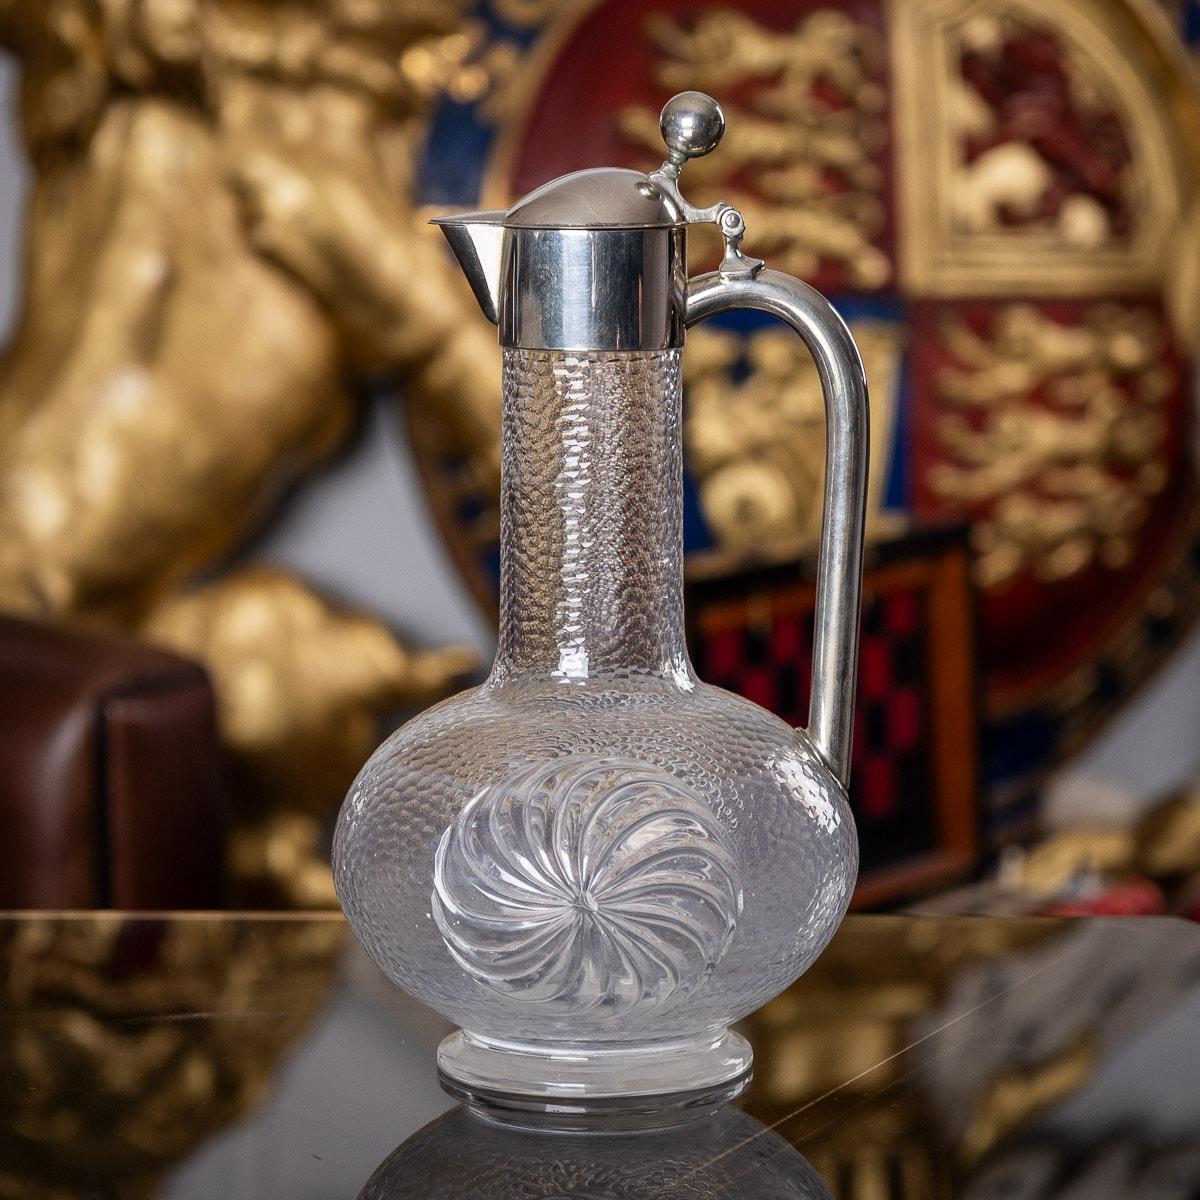 20th century German solid silver & etched glass claret jug, the baluster body beautifully hand engraved imitating a hand-hammered effect, and sides decorated with a round spiral, the plain solid silver collar mounted with a hinged lid, ball shaped